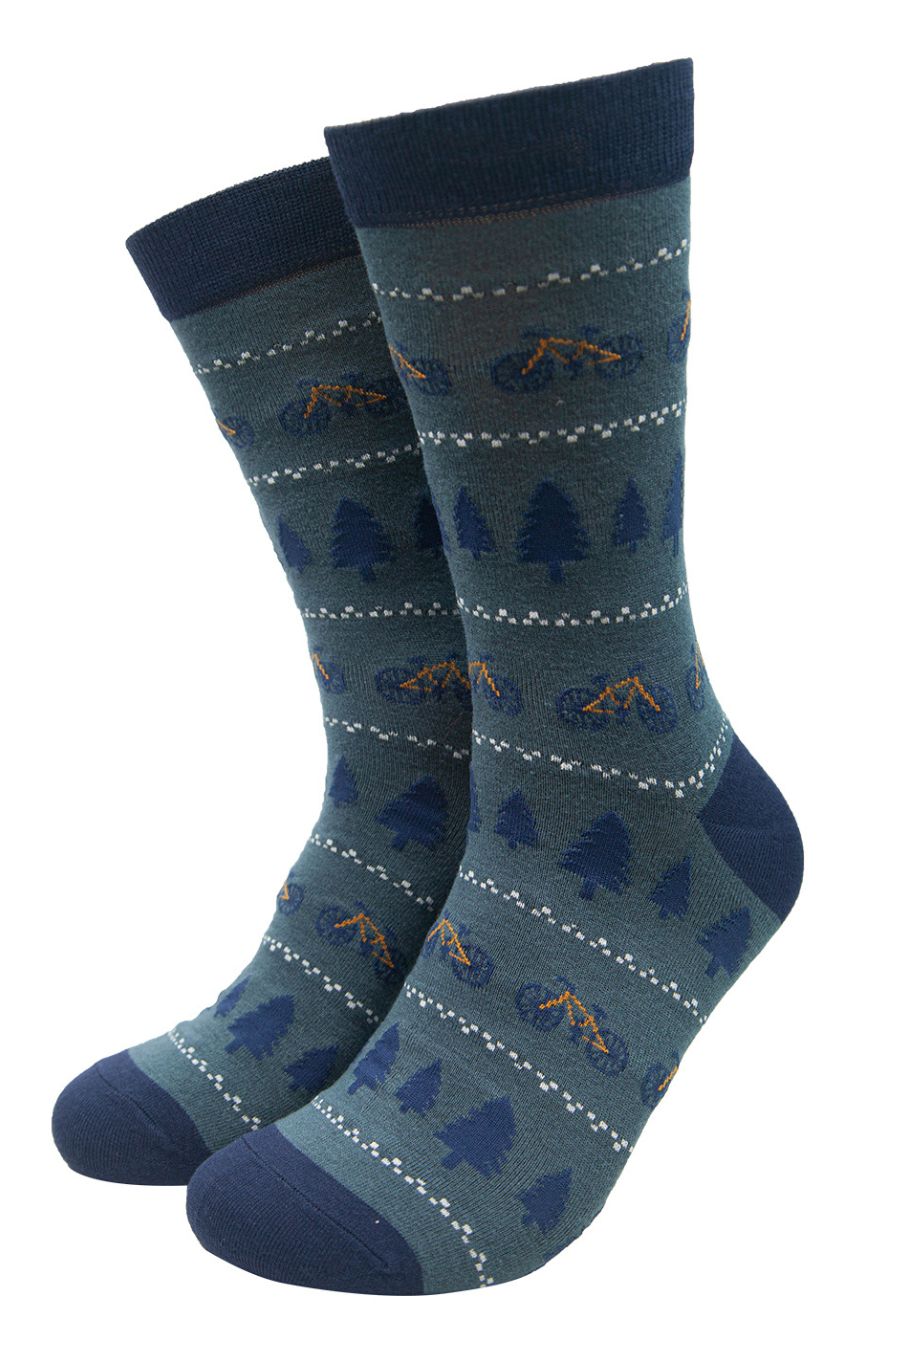 teal, blue dress socks with all over bicycle and tree print